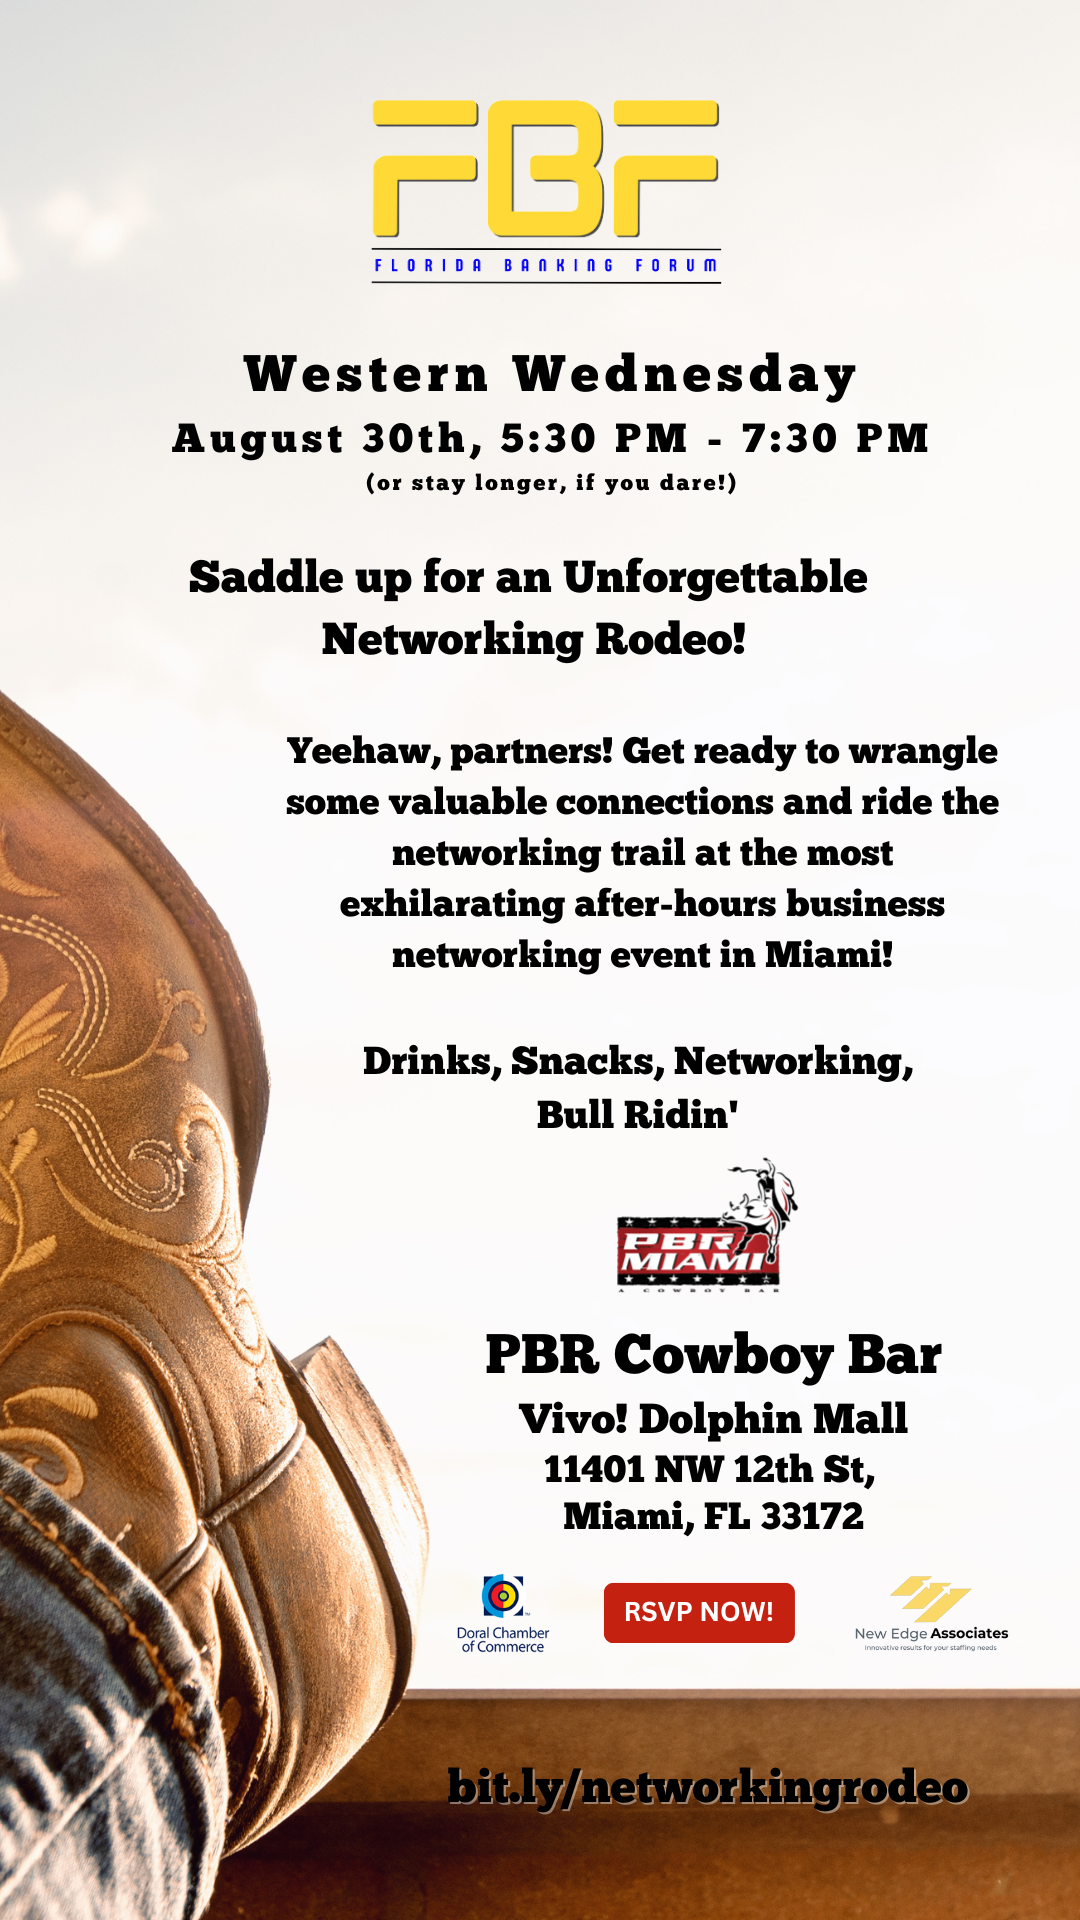 Florida Banking Forum & Doral Chamber of Commerce Invite You to Saddle up for an Unforgettable Networking Rodeo!